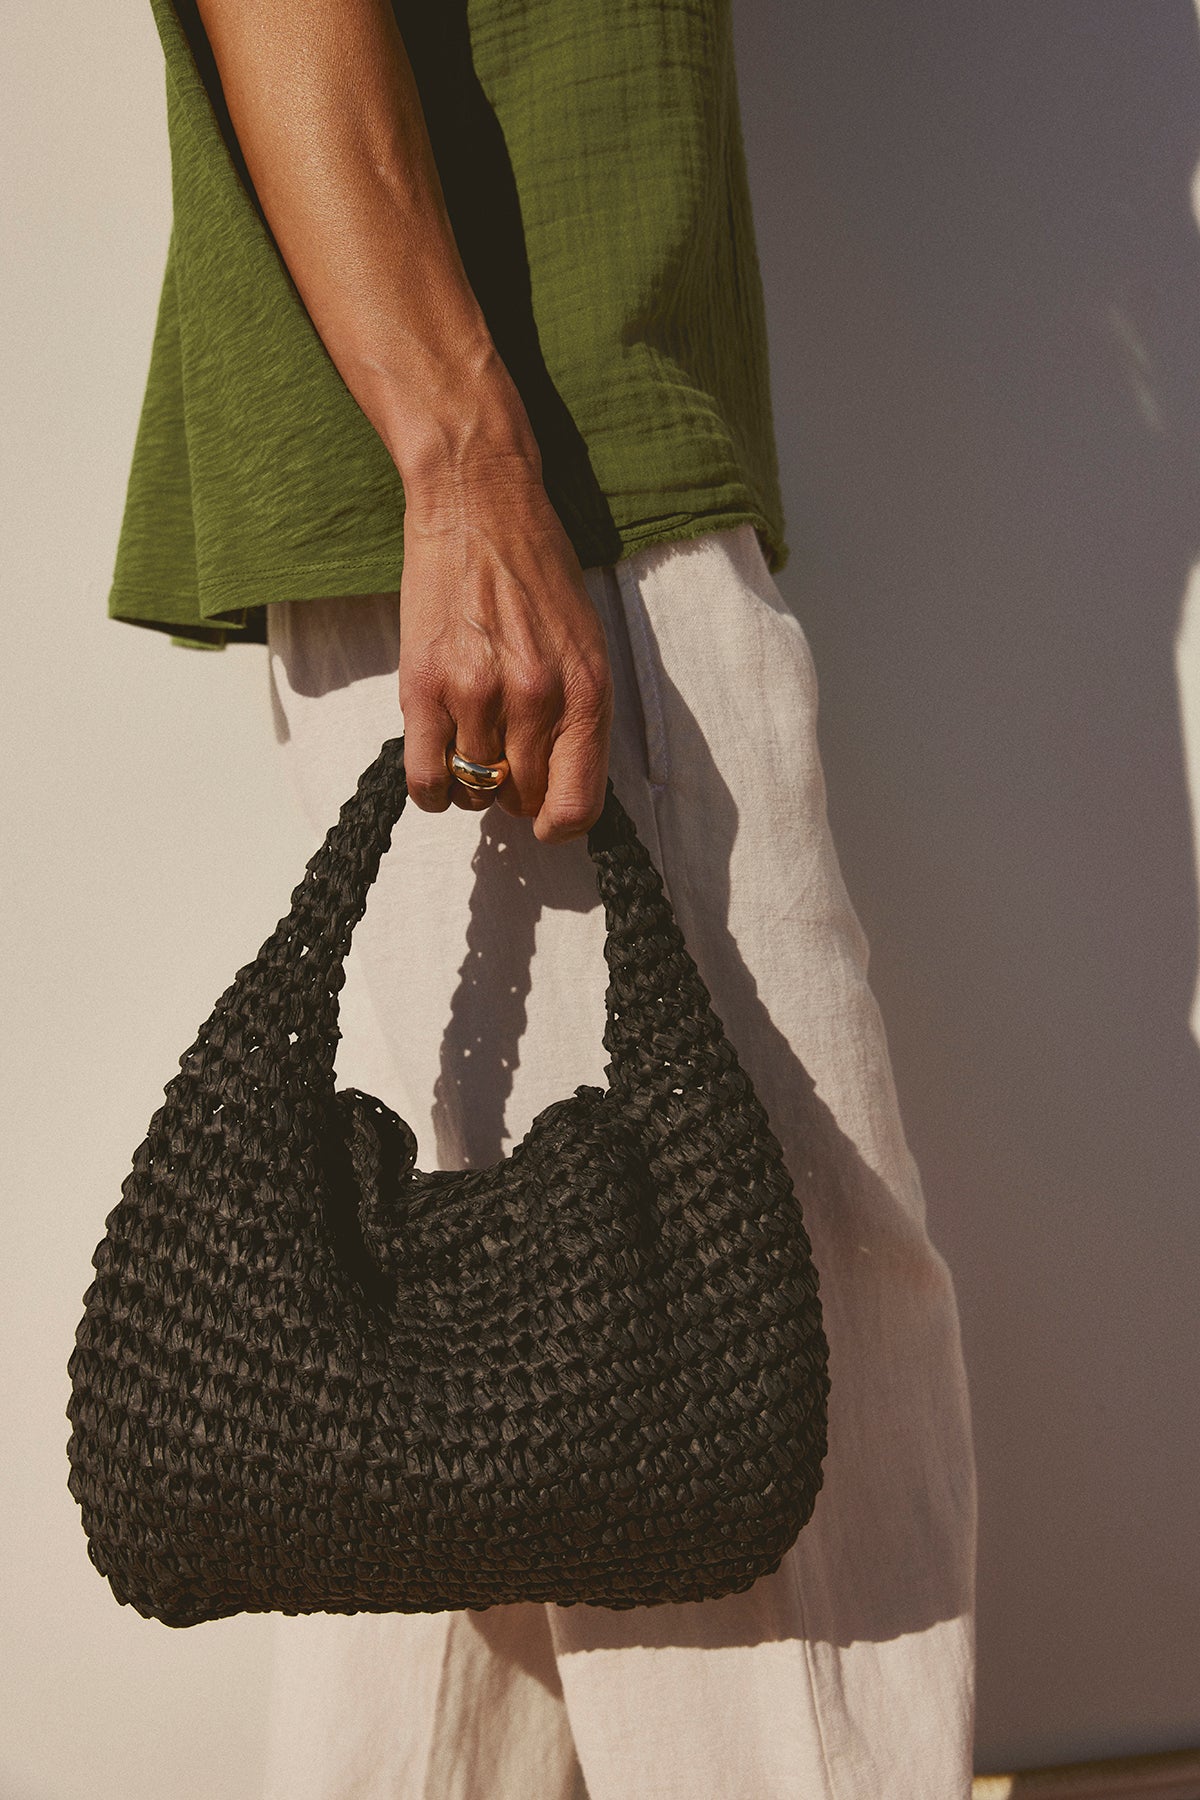   A close-up of a person holding a black Velvet by Graham & Spencer Slouch Bag, wearing a green top and white pants, with a focus on their hand and the bag. 